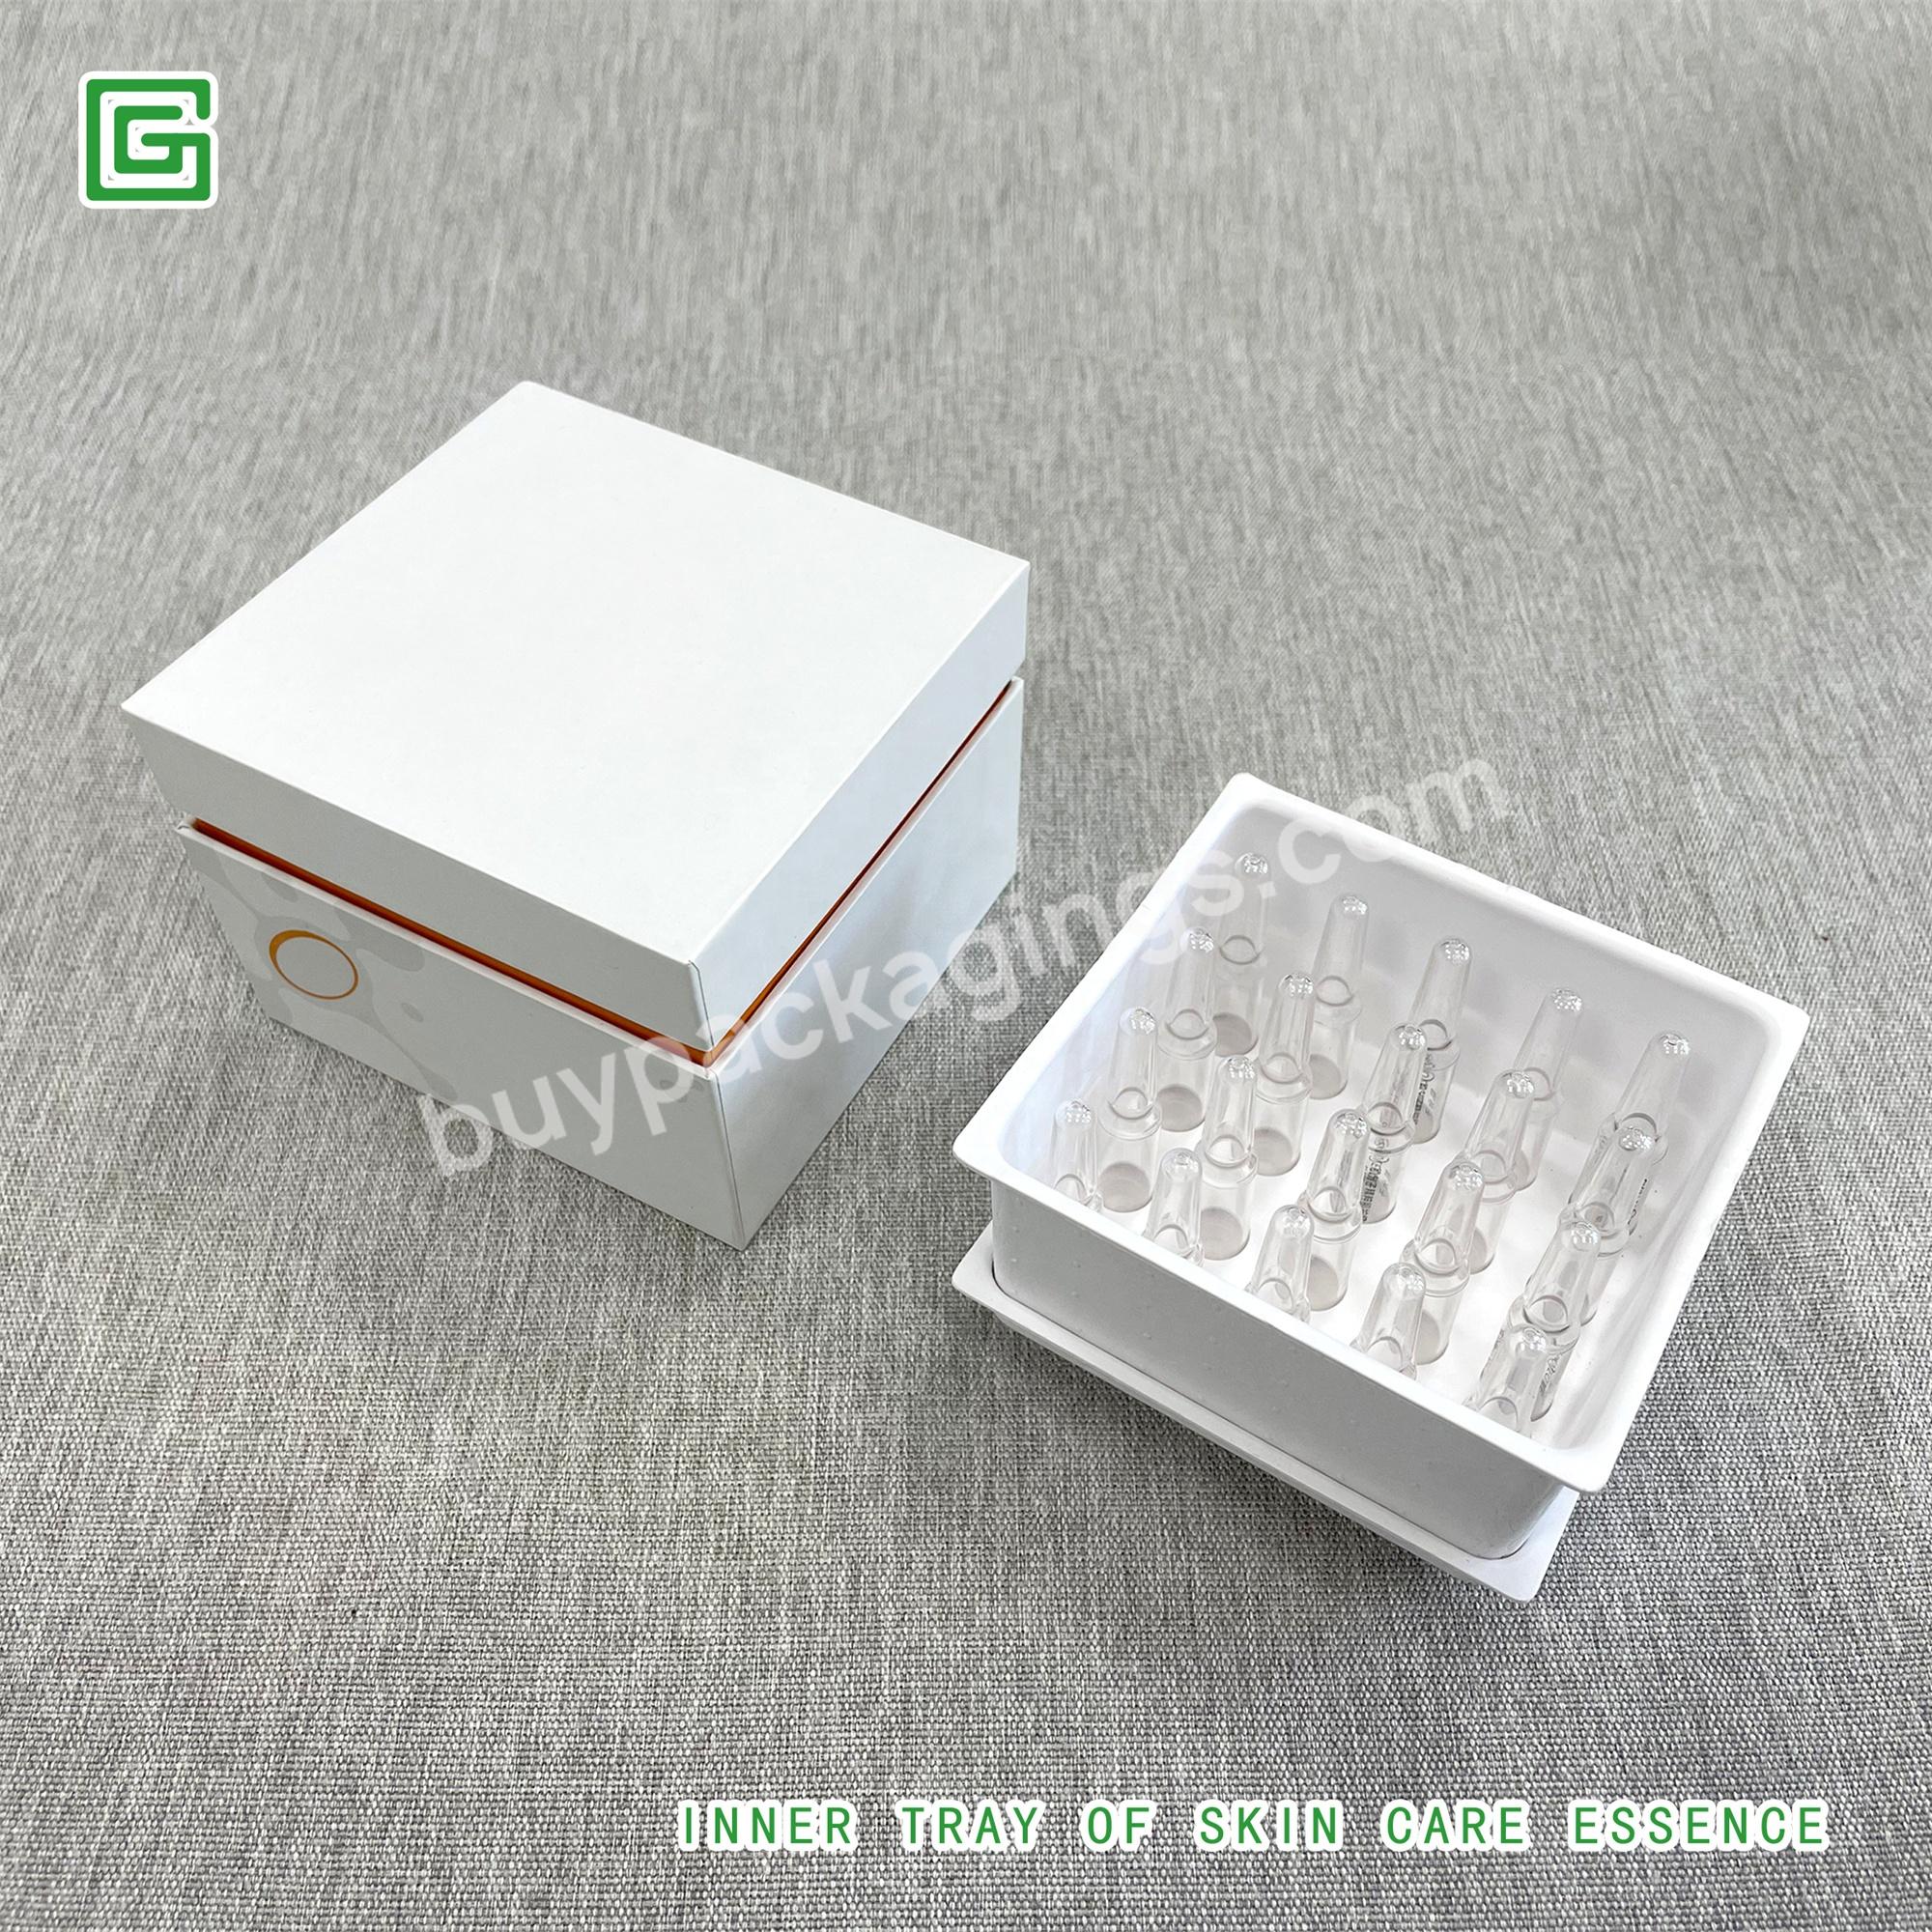 Reasonable Price Custom Cosmetic Inner Tray Molded Pulp Packaging For Skin Care Essence - Buy Pulp Packaging Mold,Molded Paper Pulp Packaging Box,Paper Pulp Molded Packaging.